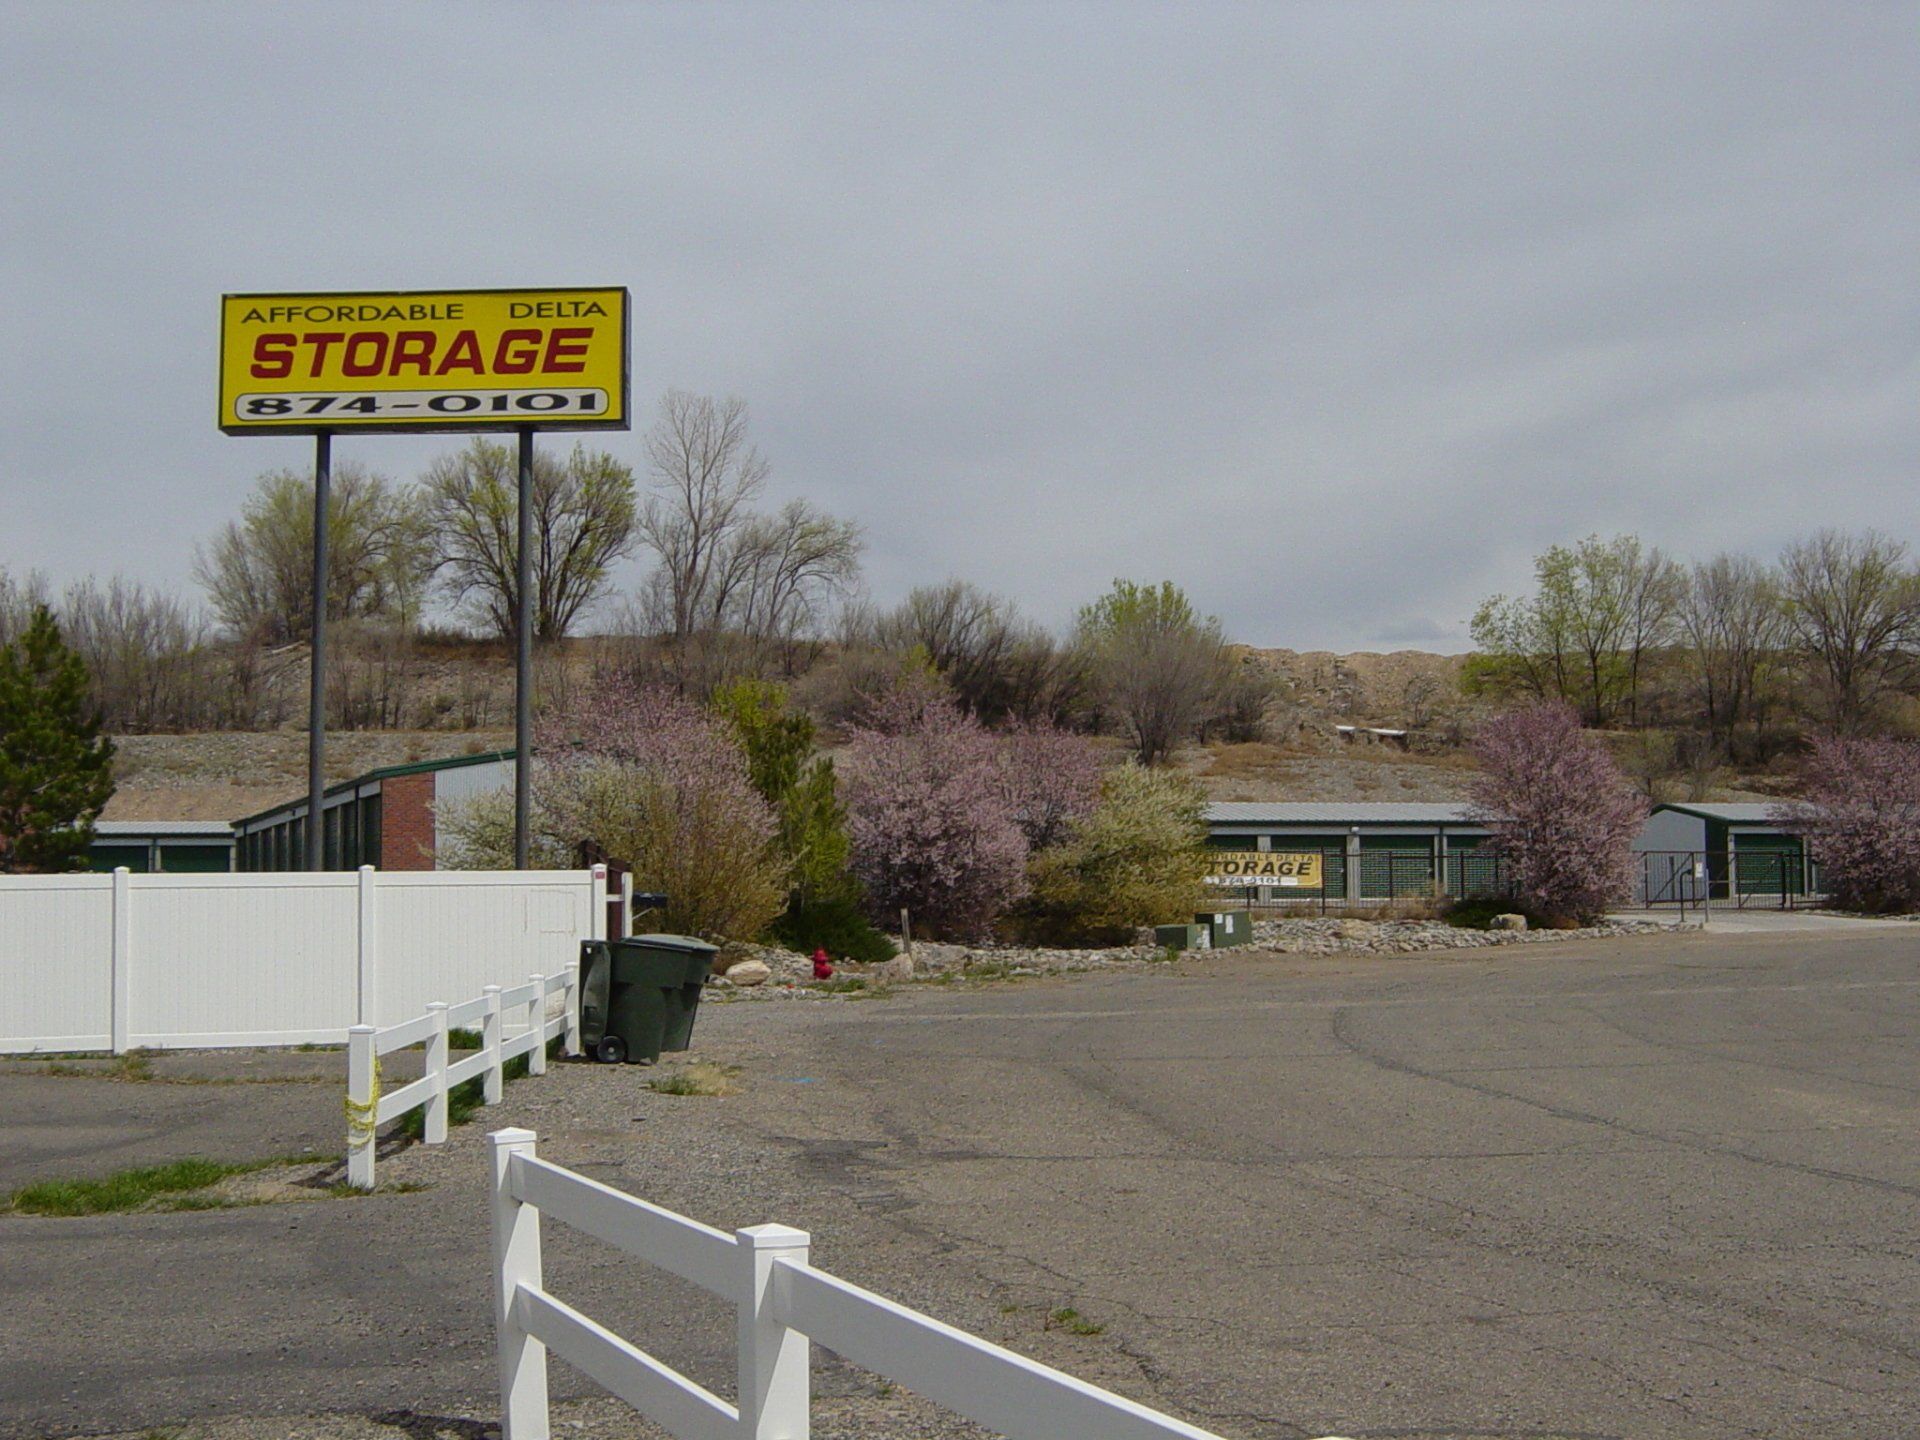 Storage Facility with Logo - Affordable Storage in Delta, CO